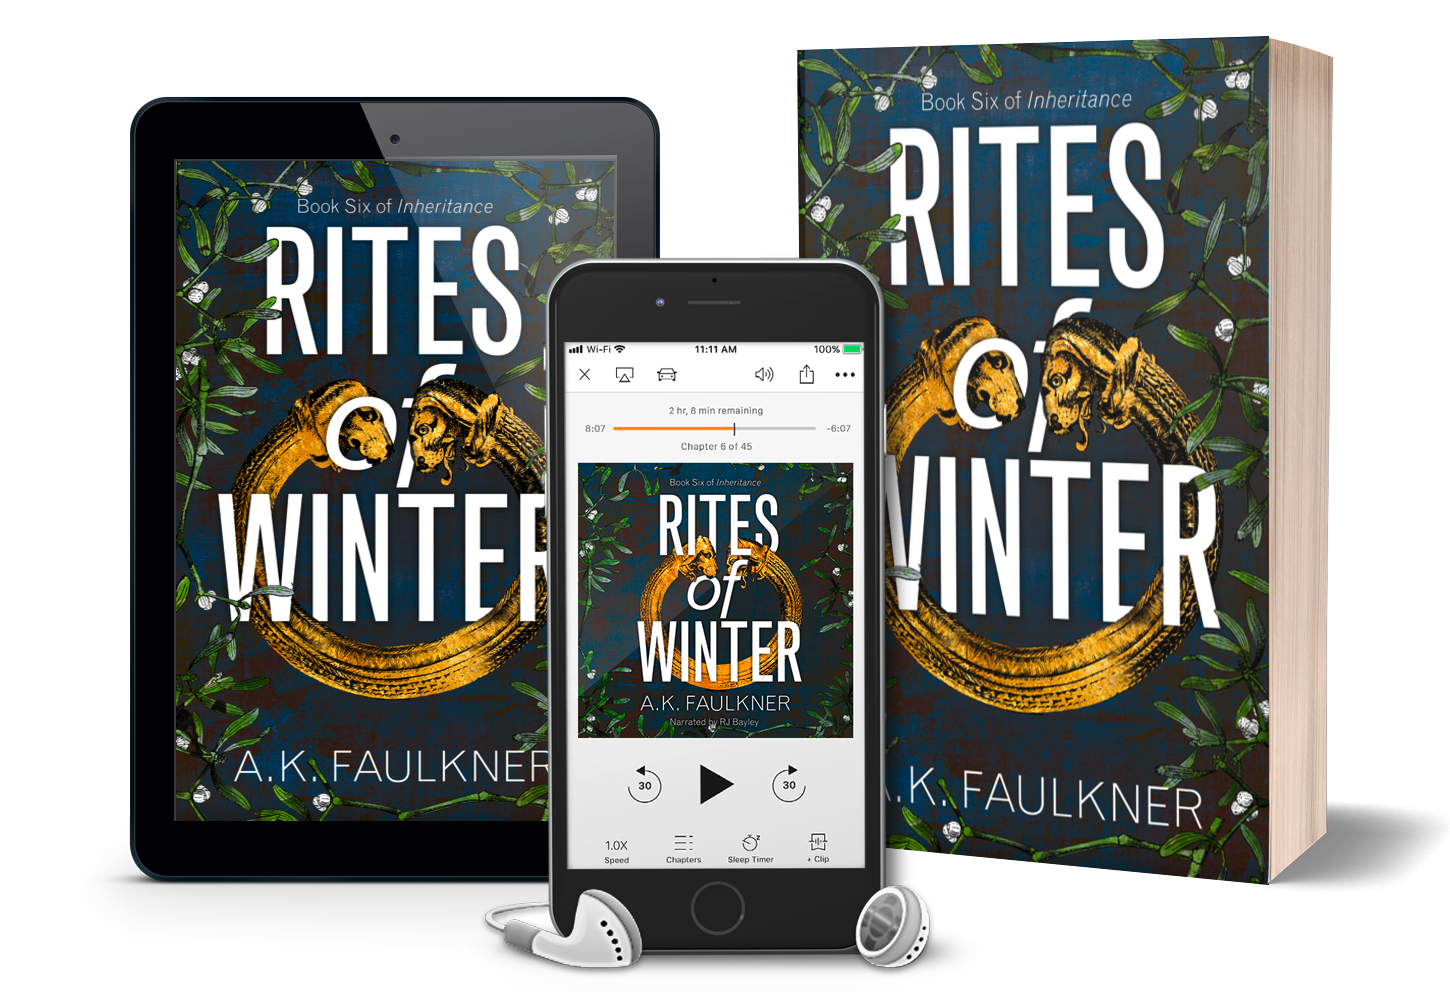 Rites of Winter as an ebook, audiobook, and paperback